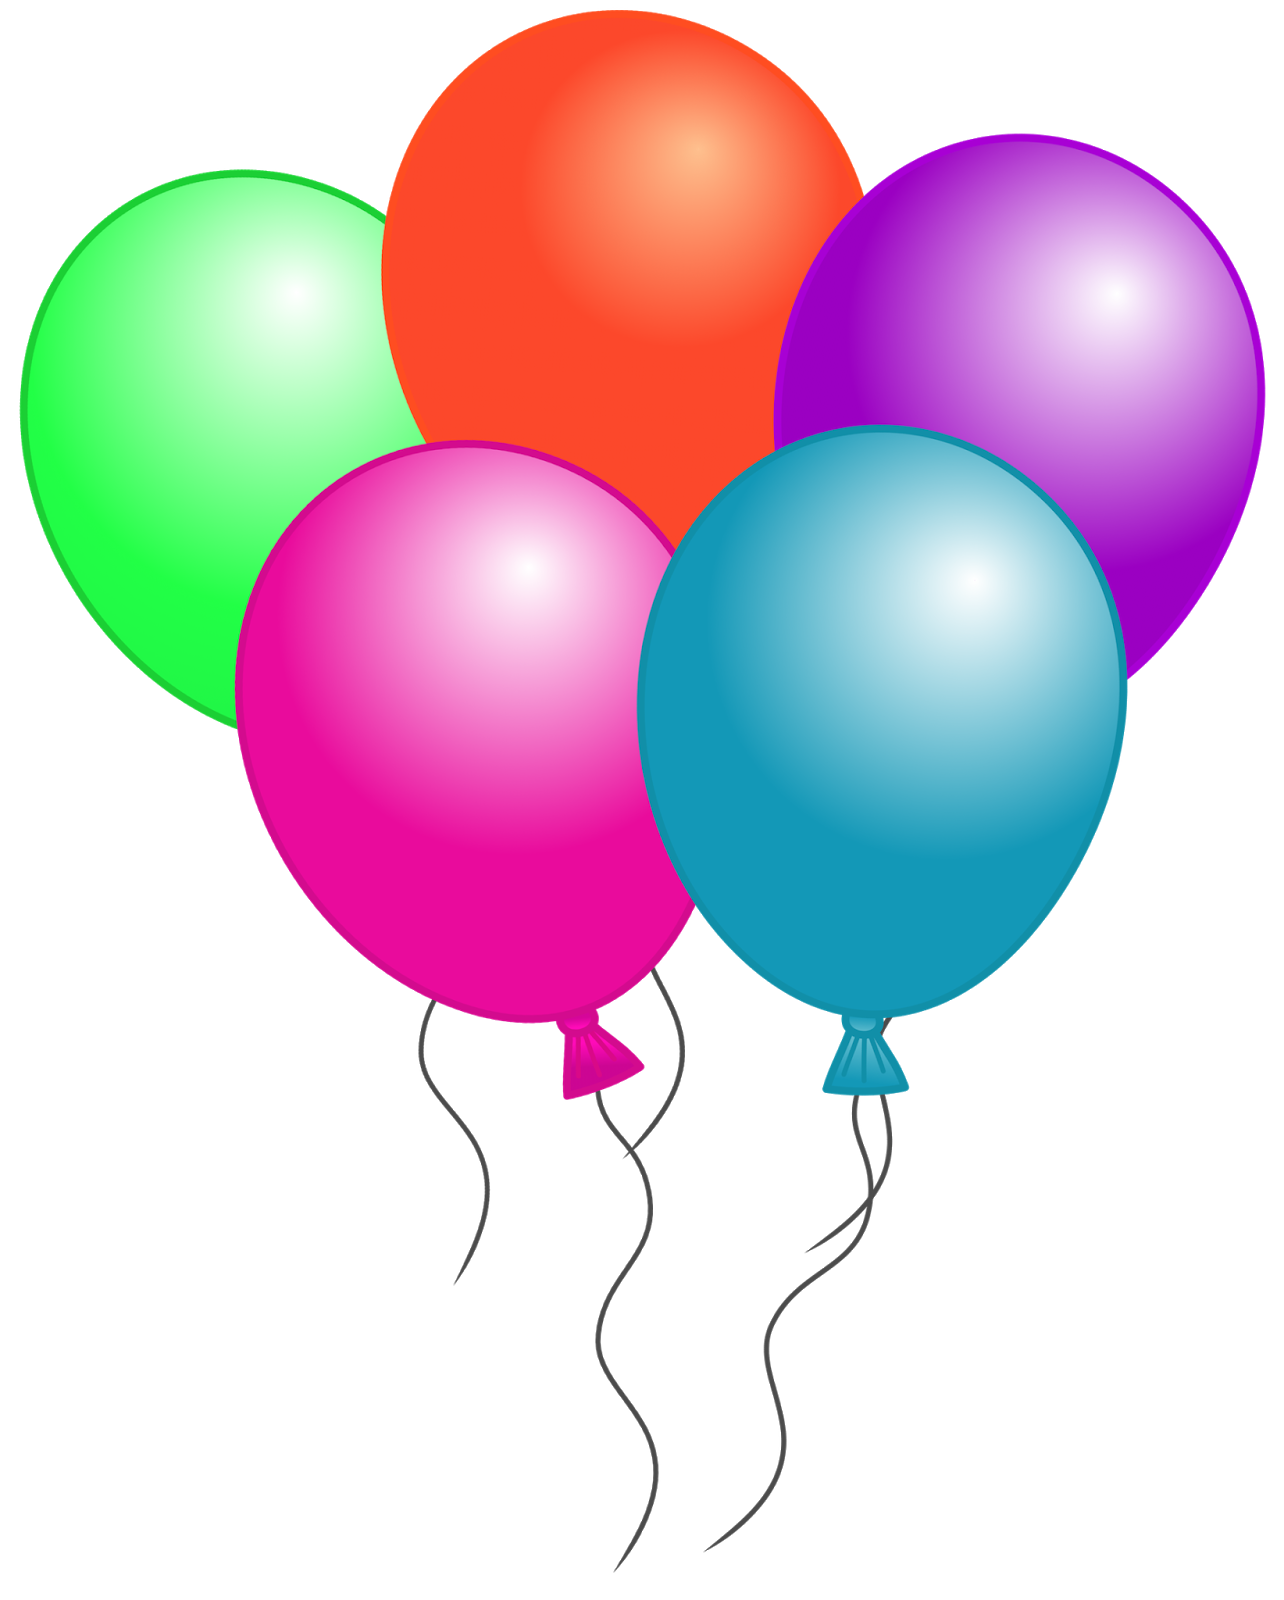 Yellow Balloon Clipart | Clipart library - Free Clipart Images